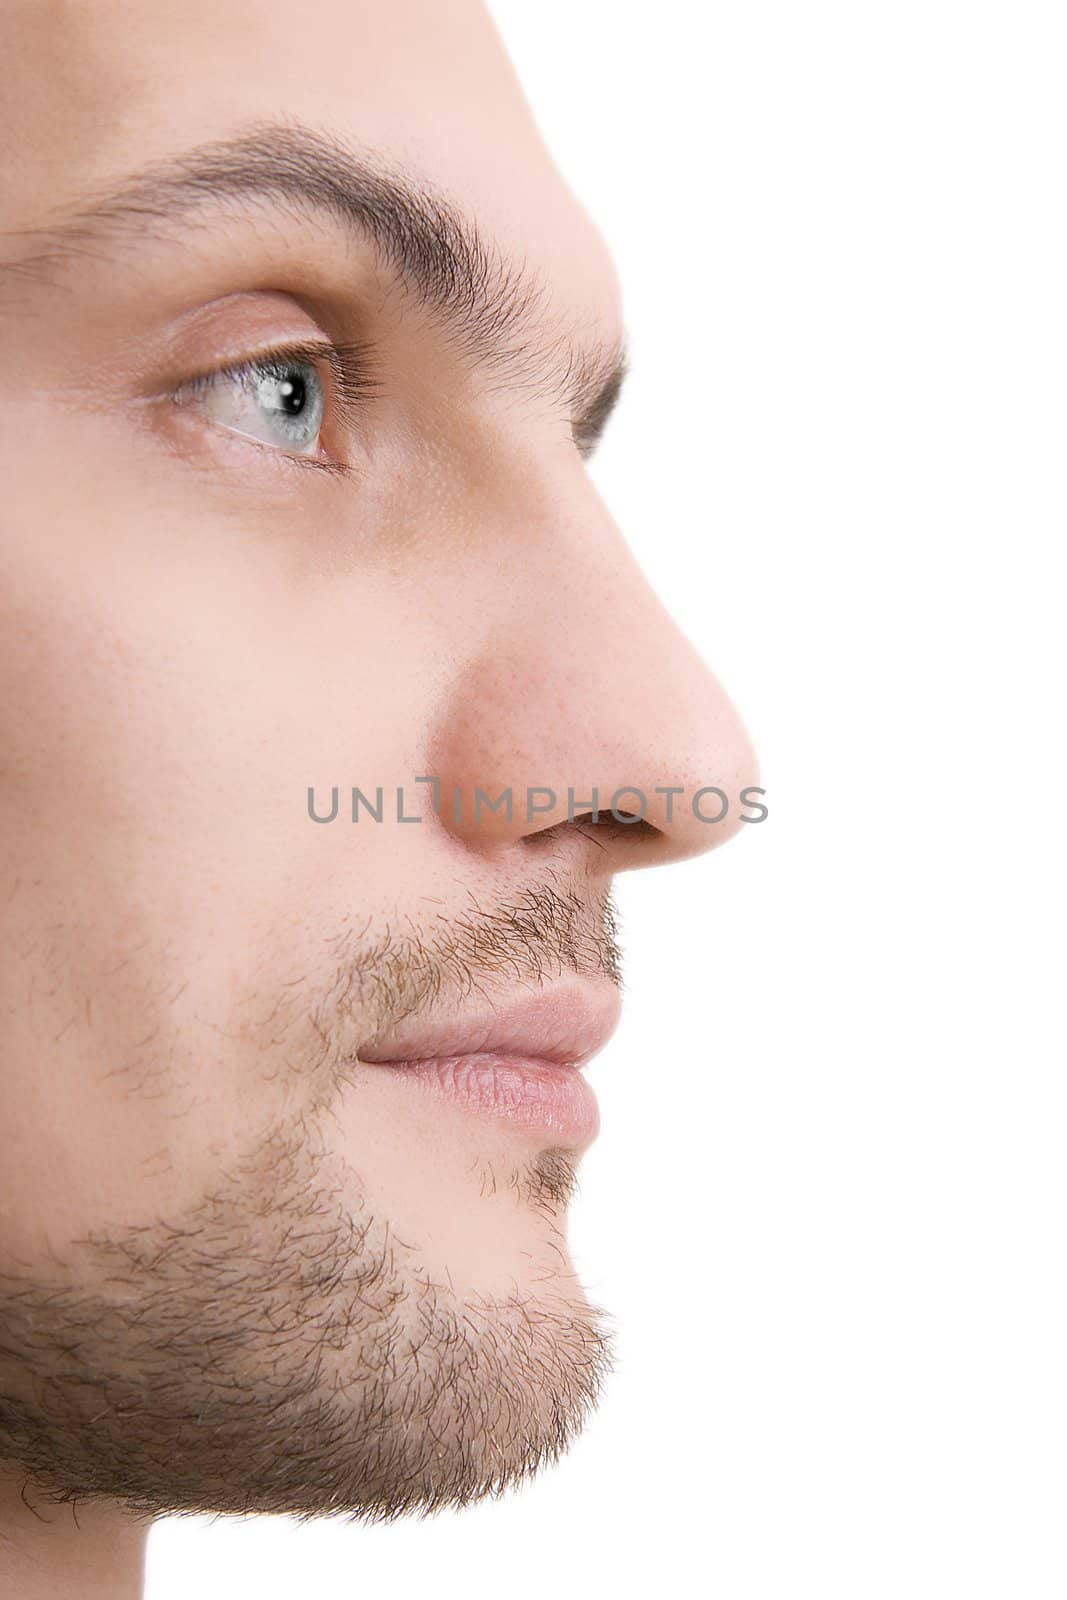 Man's face with blue eyes in a profile on a white background